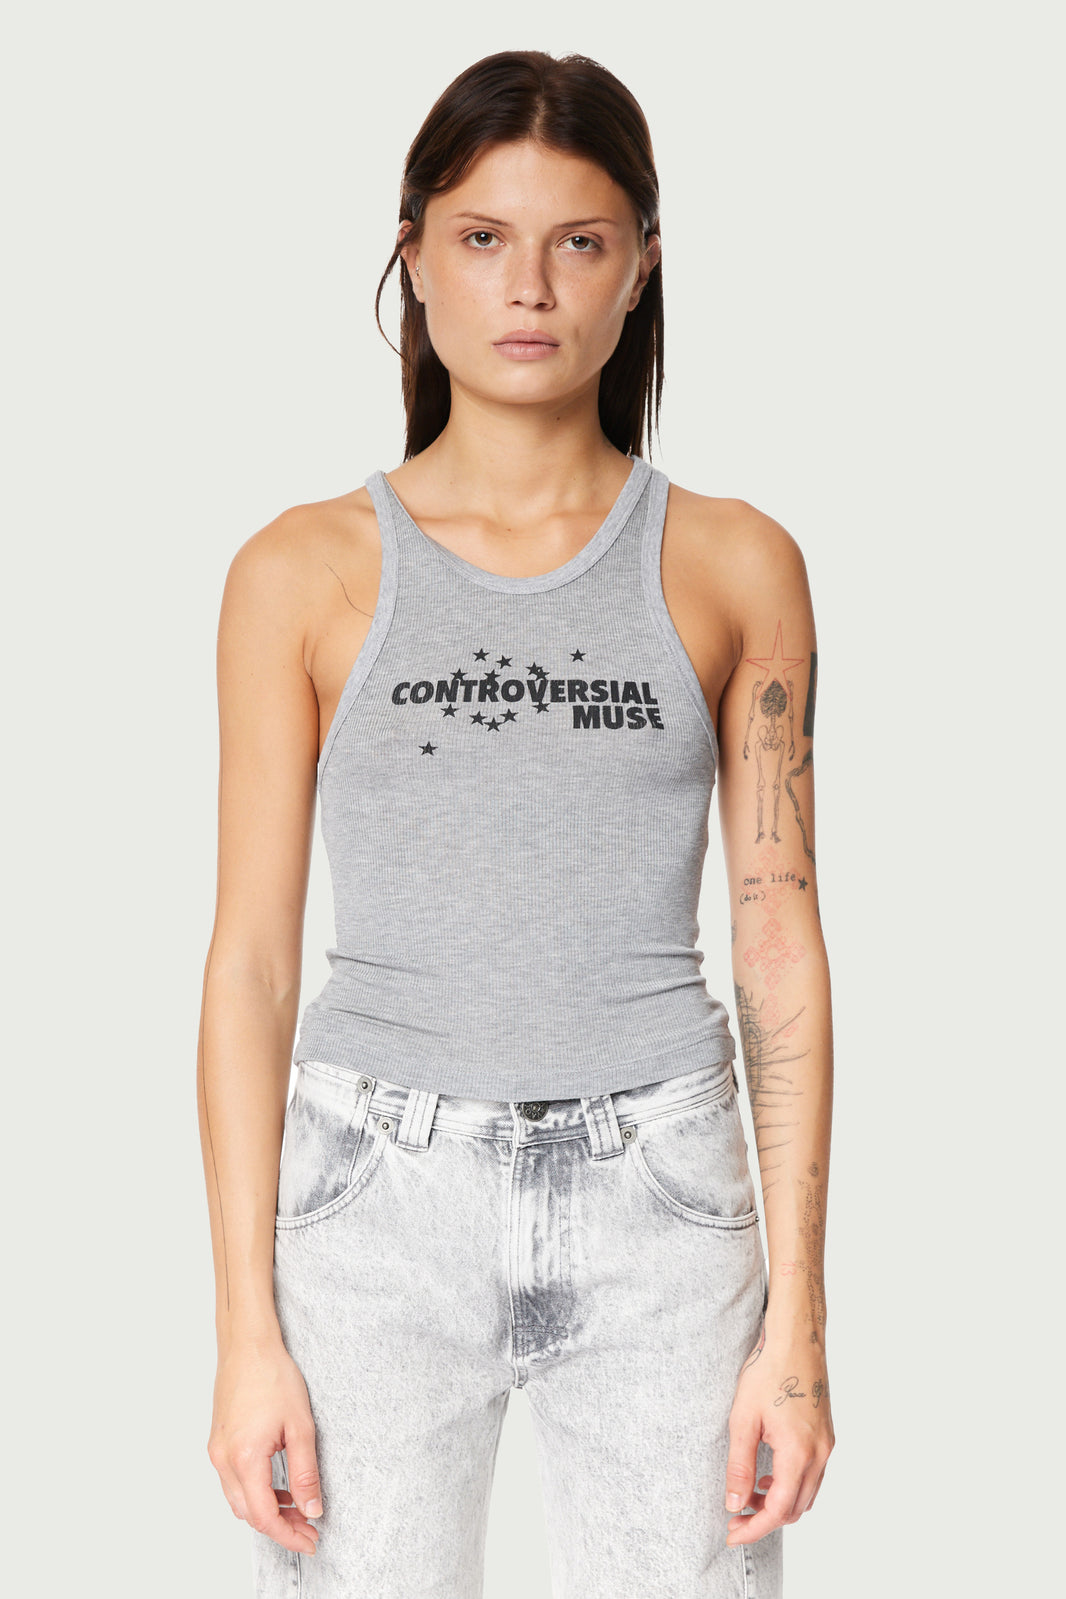 WOMEN'S CONTROVERSIAL MUSE TANK